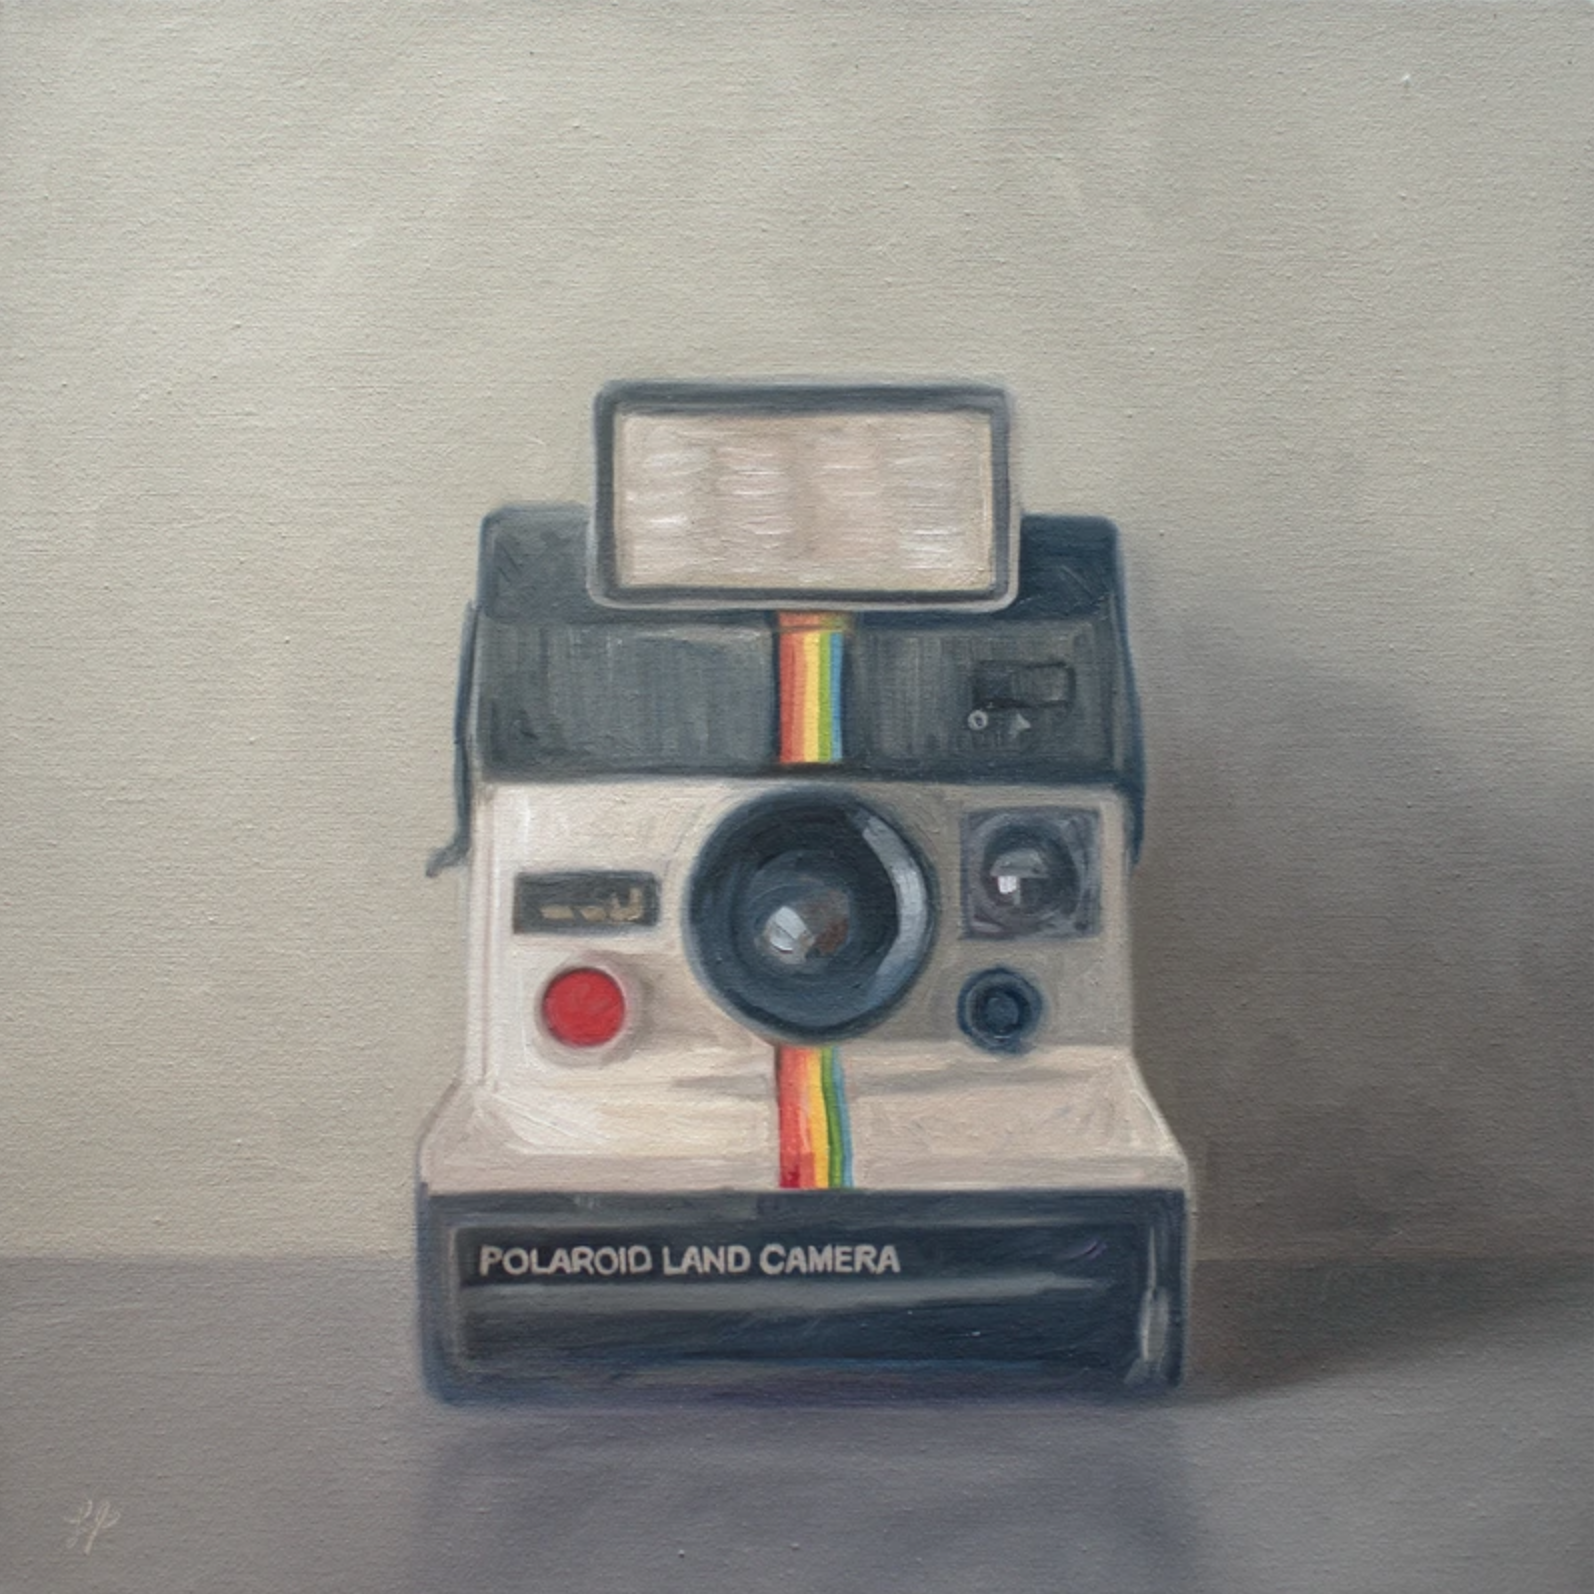 A vintage Polaroid camera rests on a grey surface with a light warm grey background.